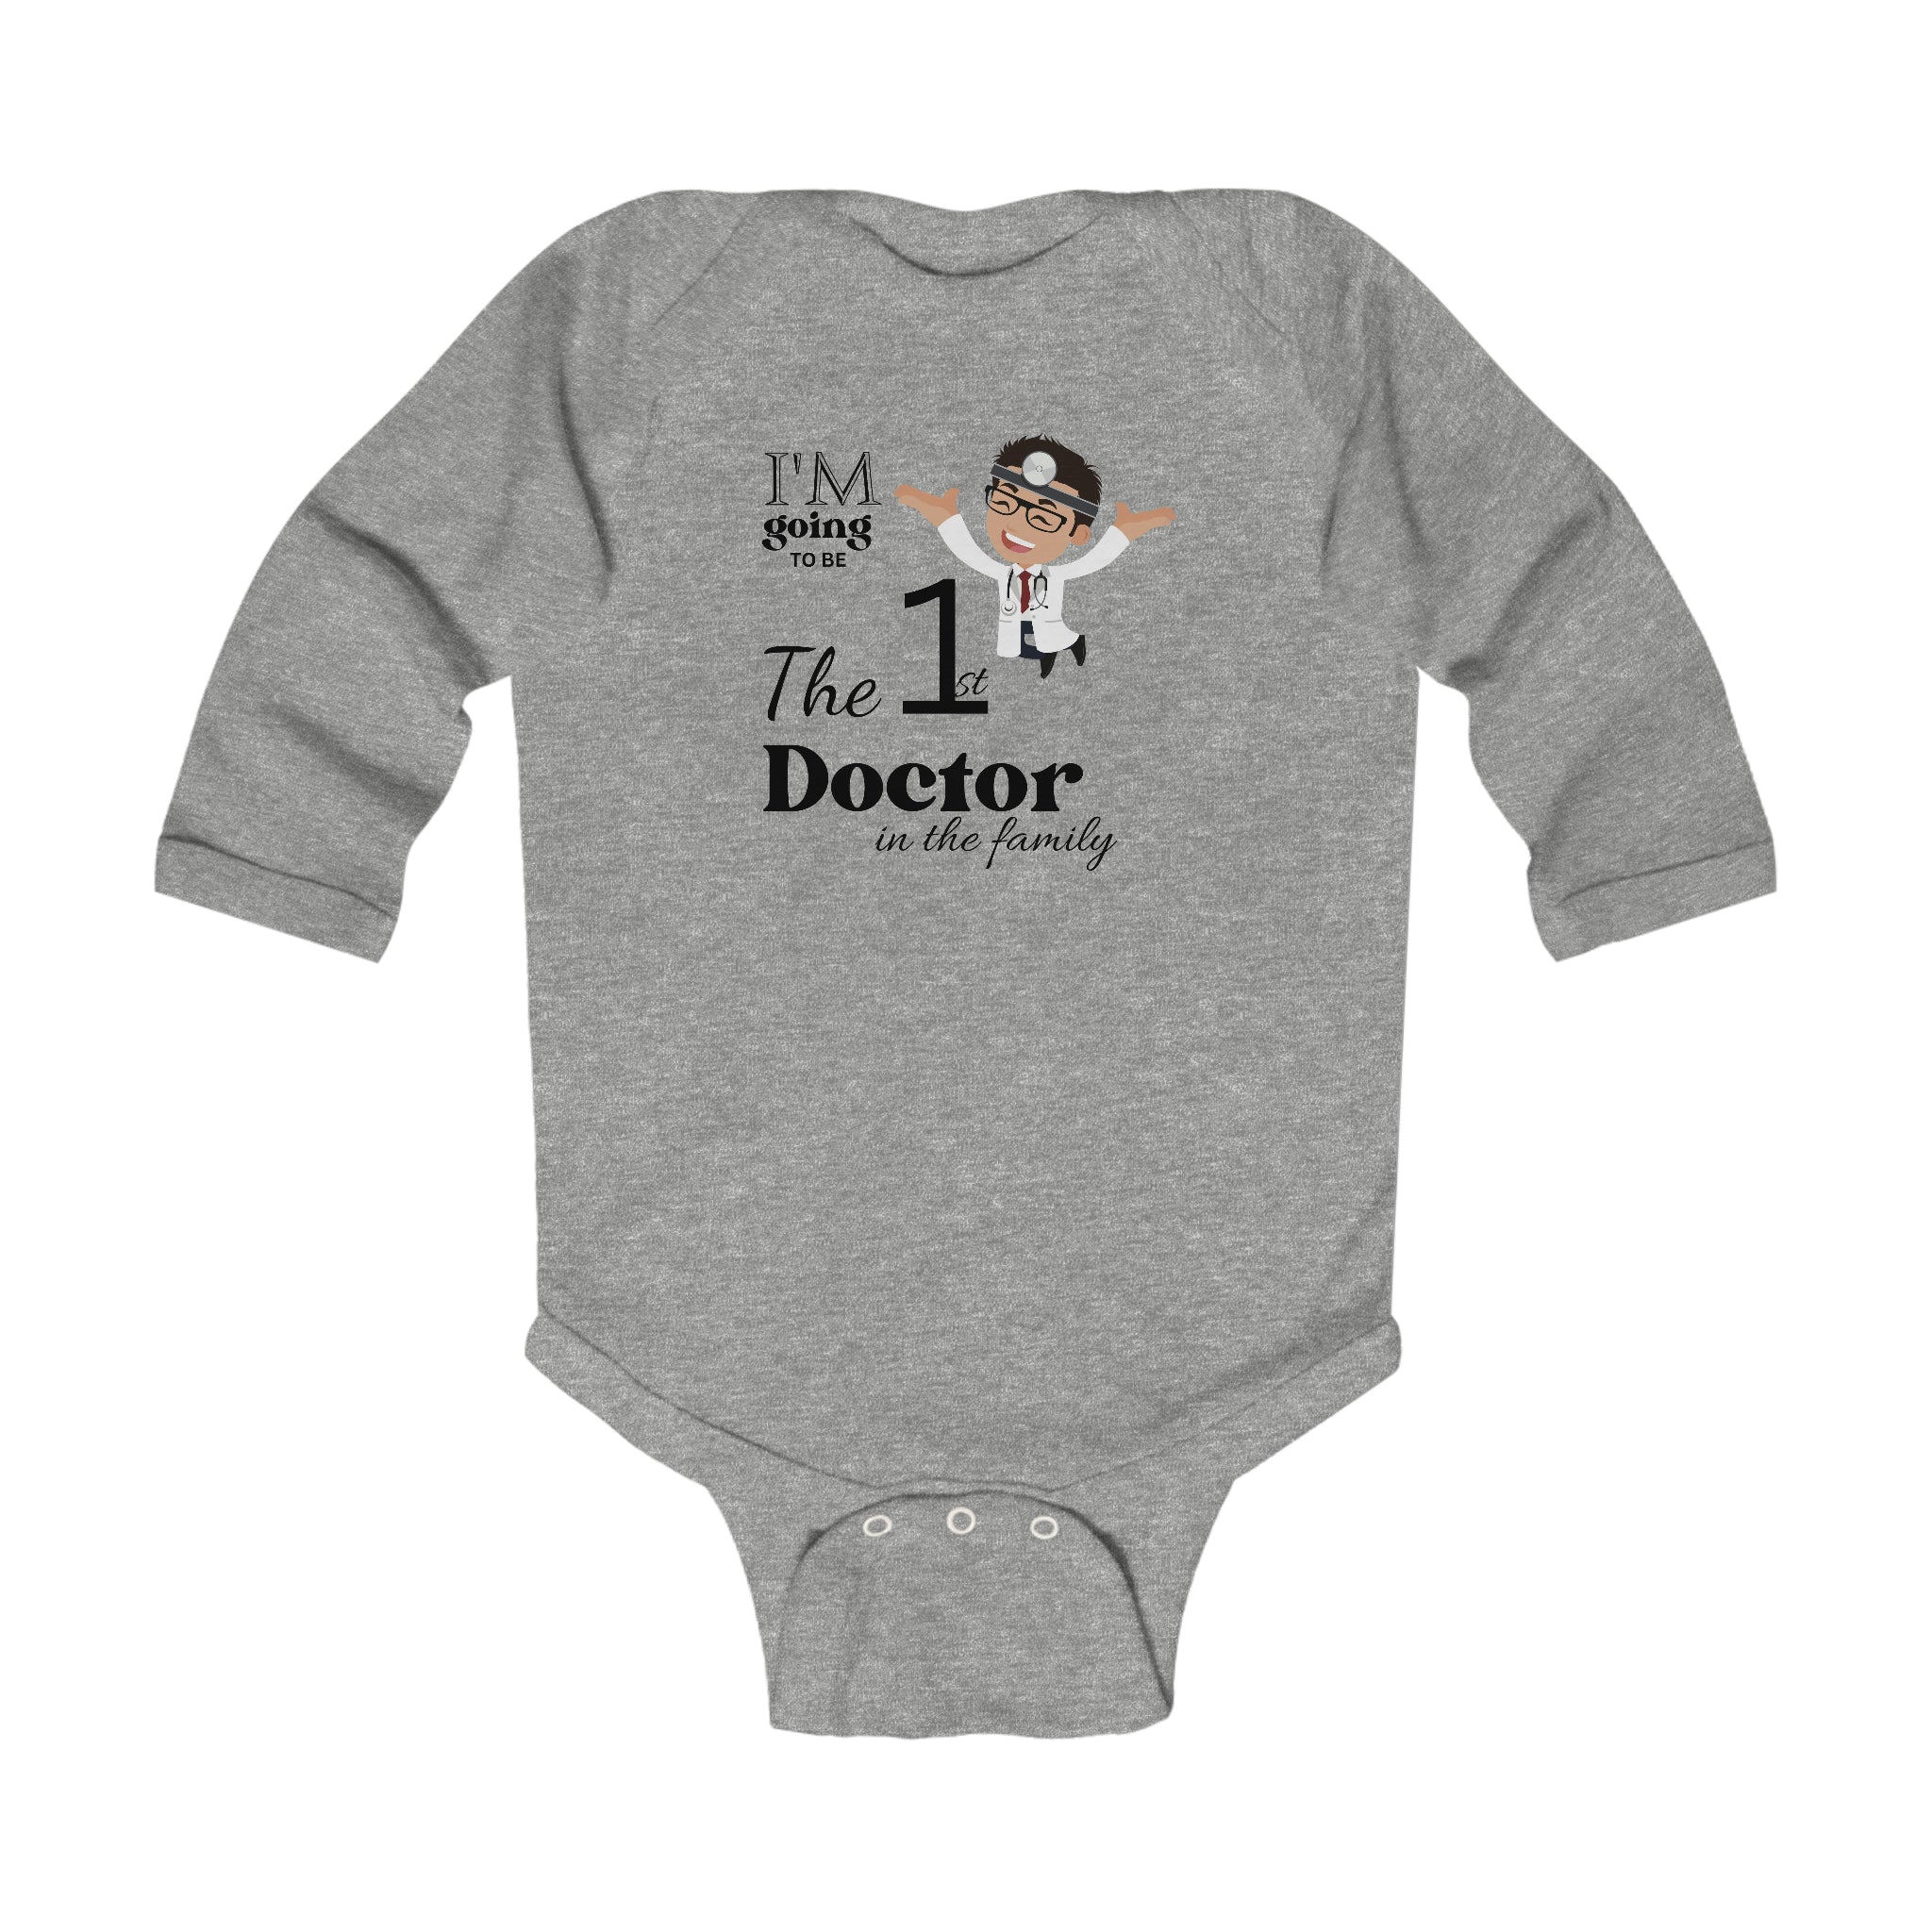 I'm Going To Be The 1st Doctor in the family Long Sleeve Baby Bodysuit